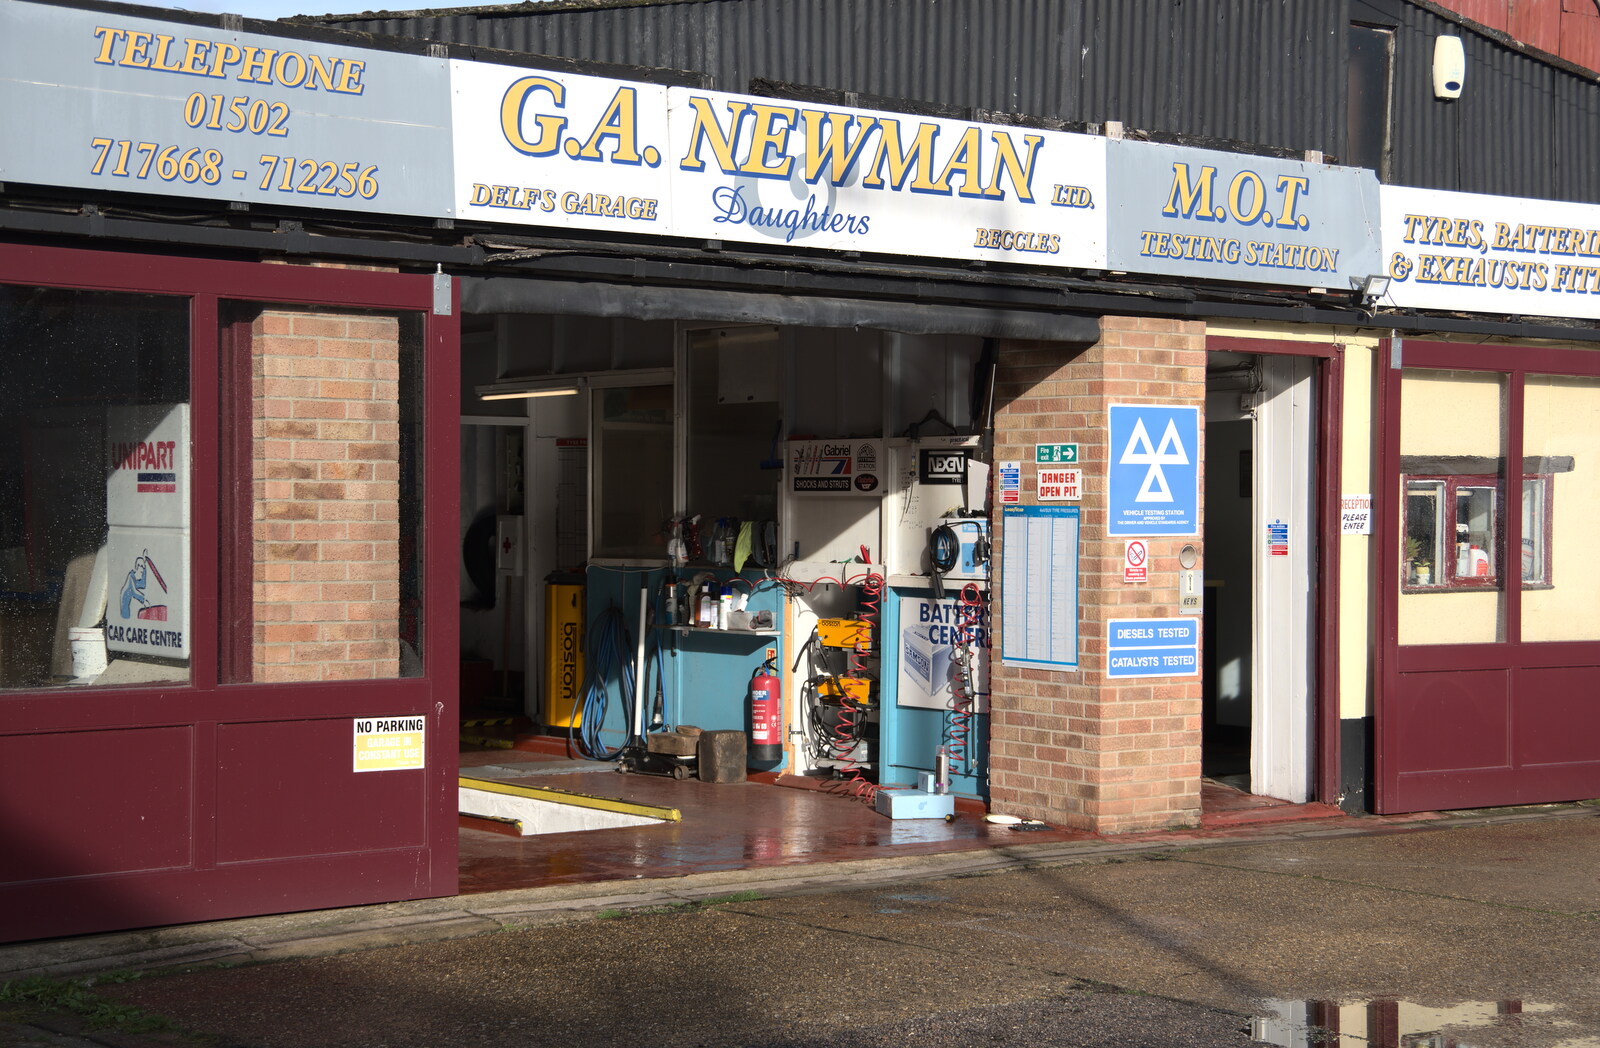 An Afternoon in Beccles, Suffolk - 26th October 2022: A cool old-school garage workshop